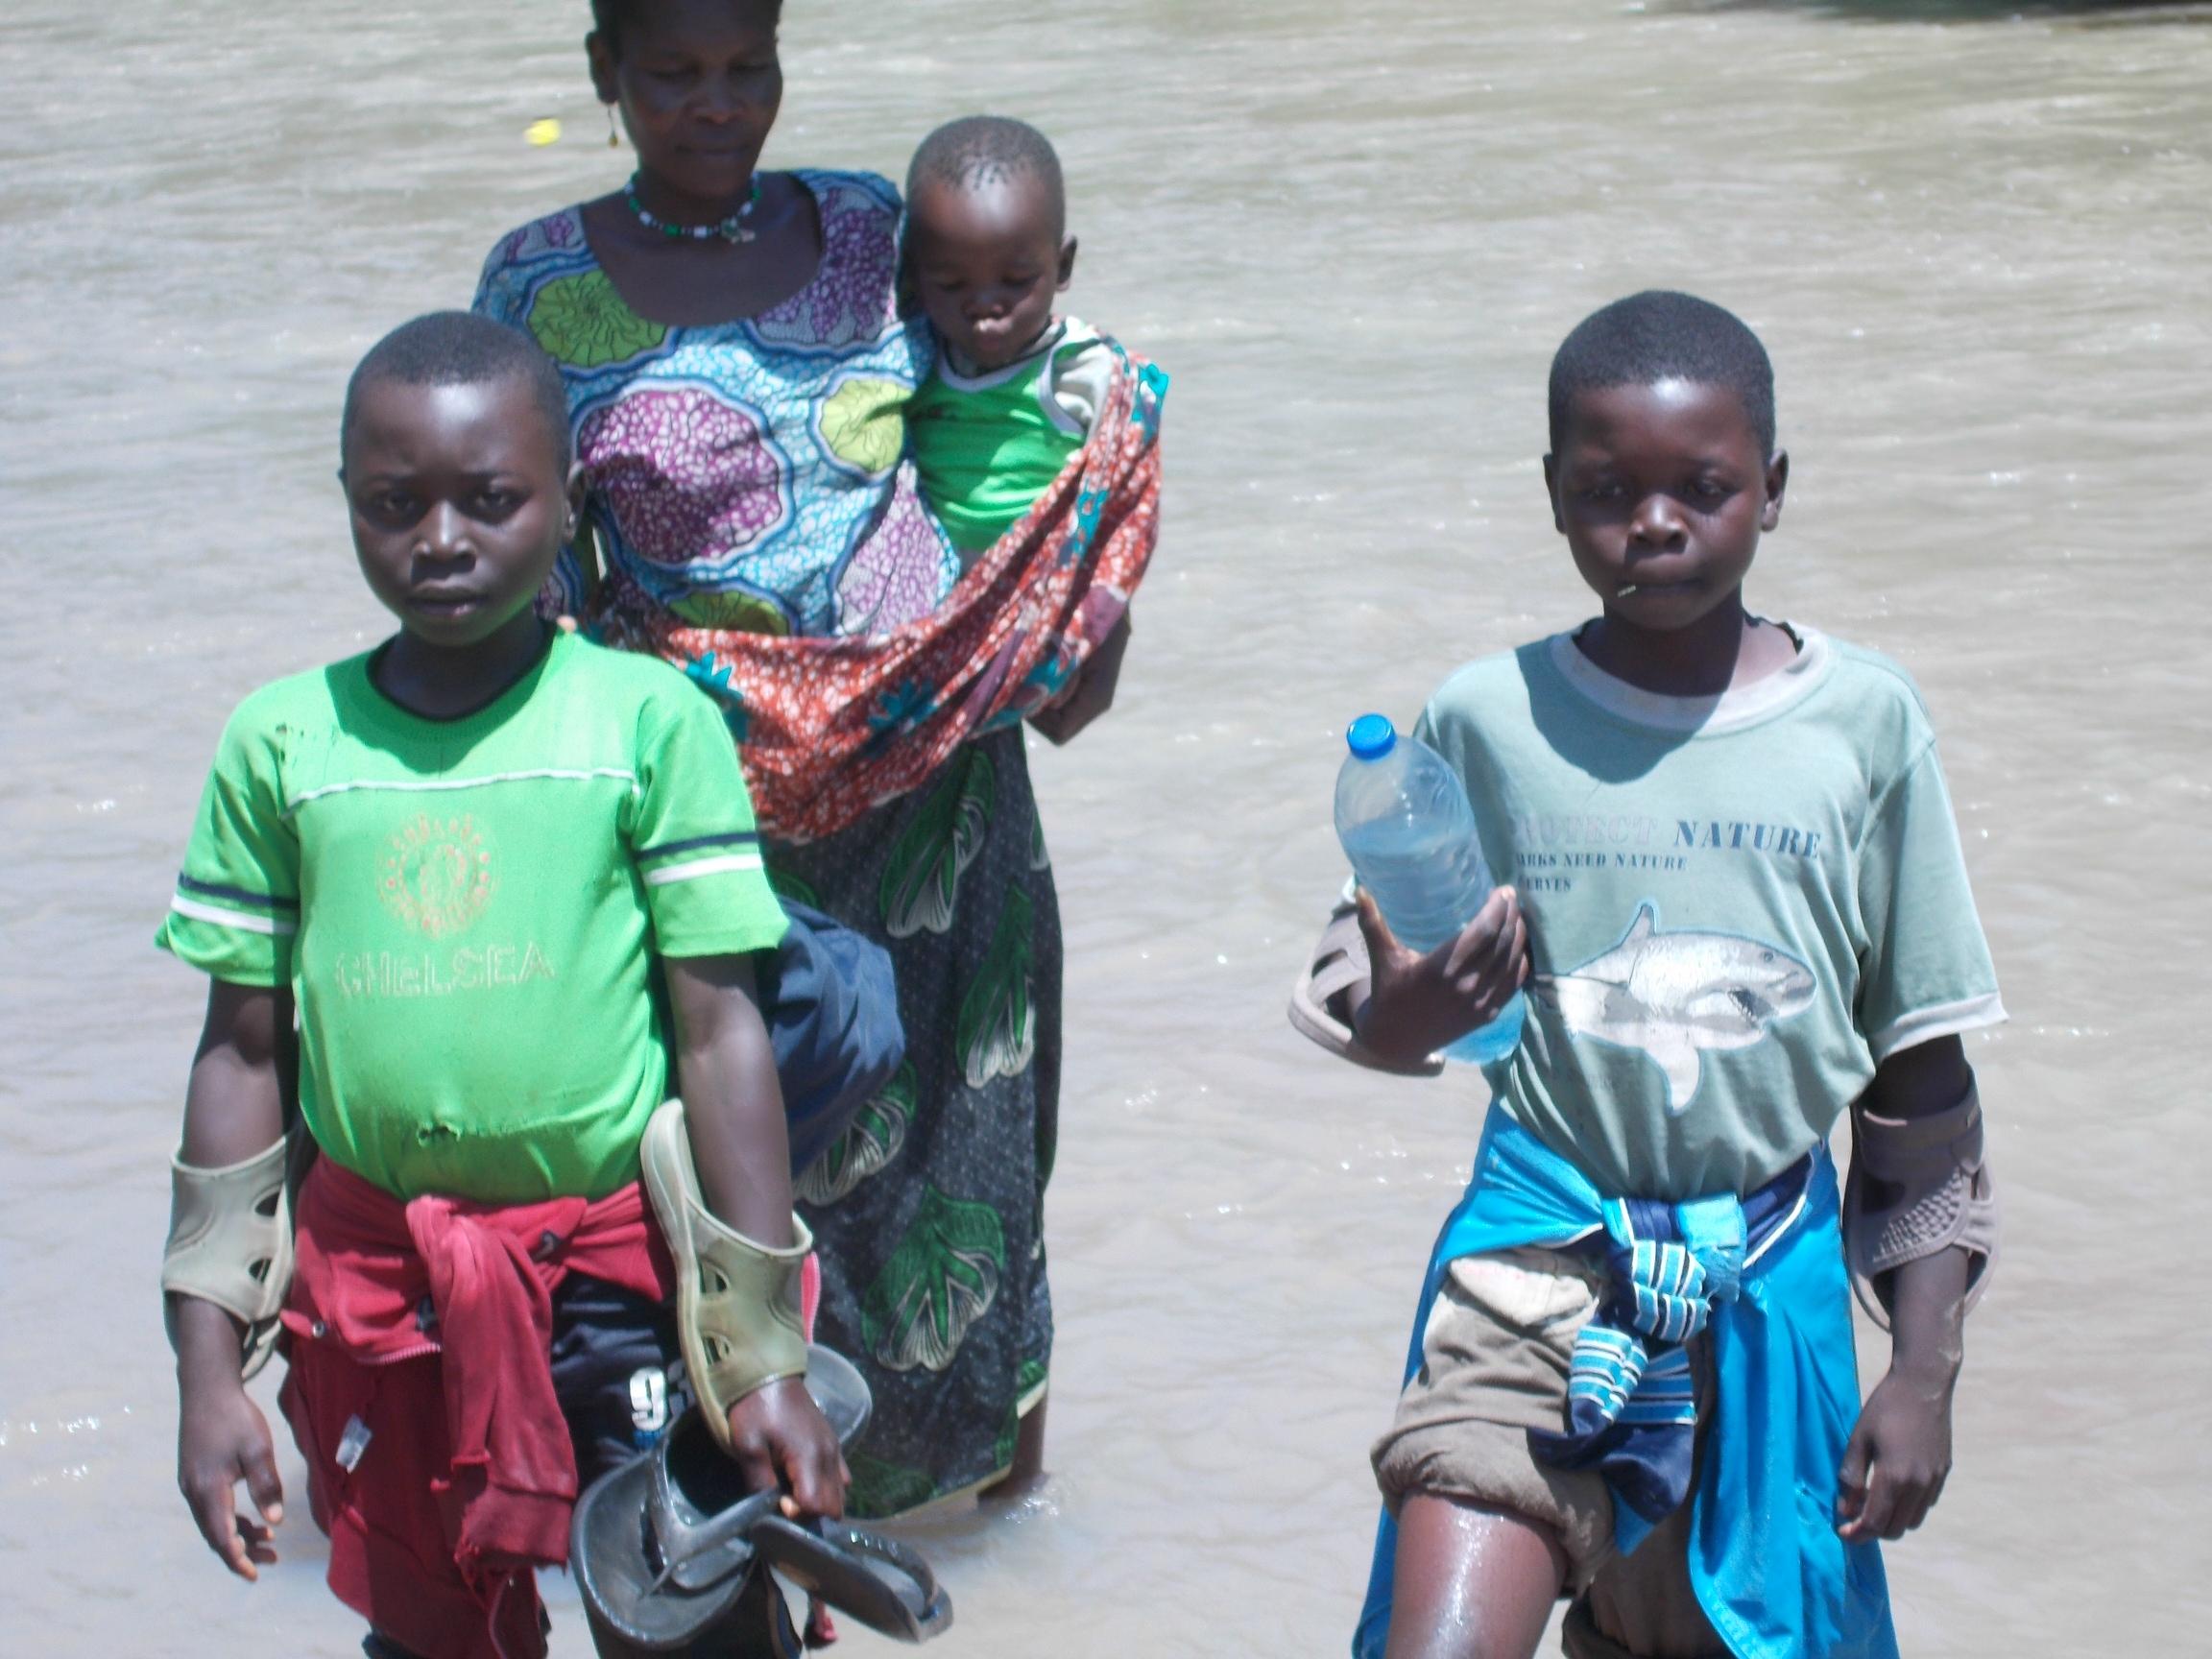 Bohong villagers had to flee their homes after a Seleka rebel attack in mid-August. Photo: EELCAR